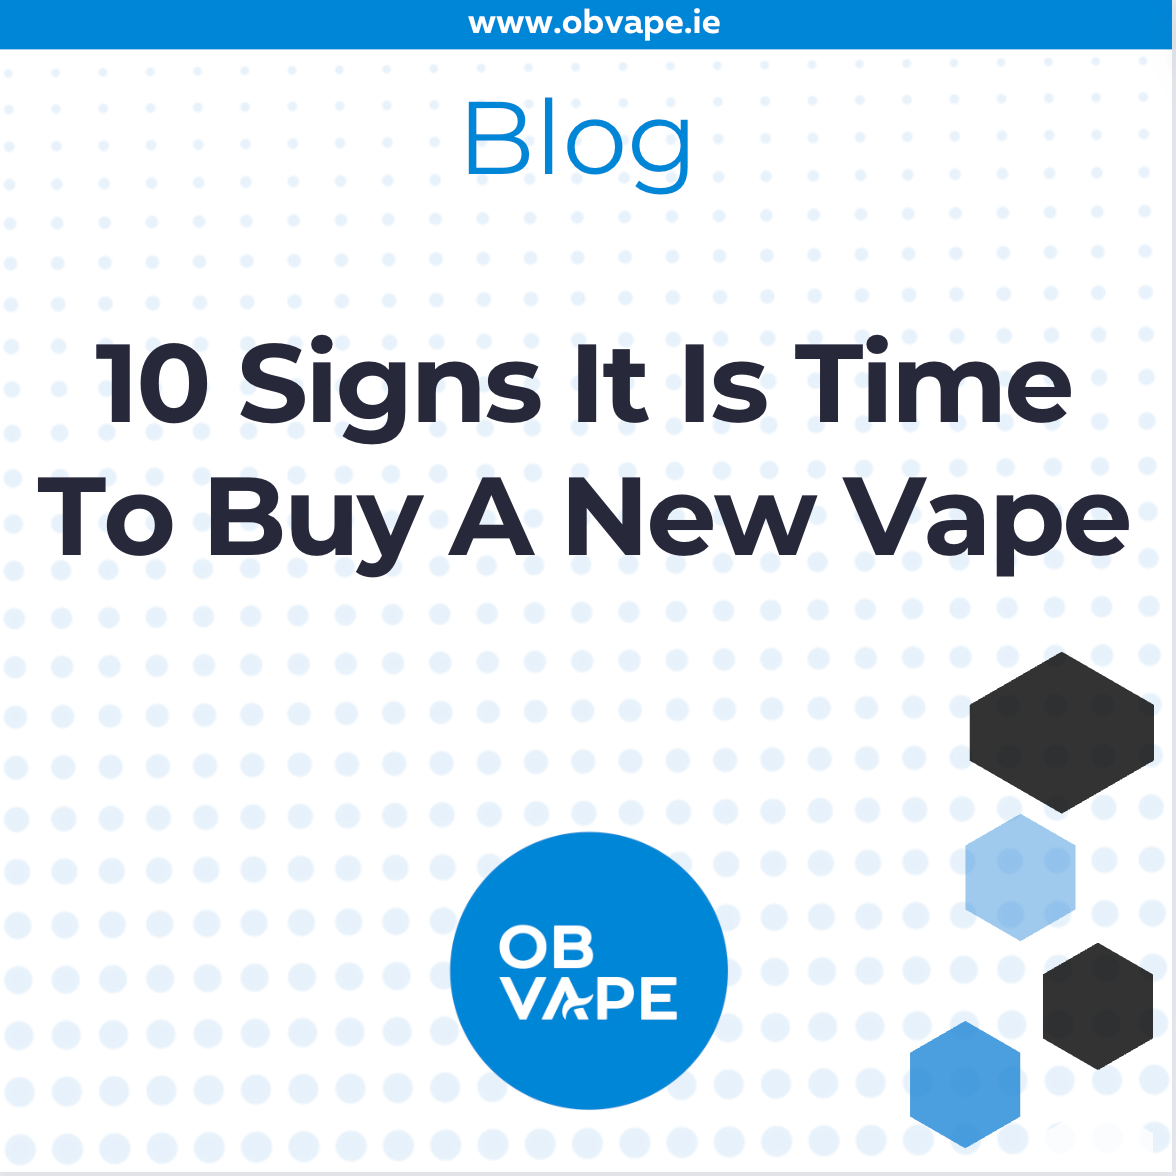 10 Signs It Is Time To Buy A New Vape